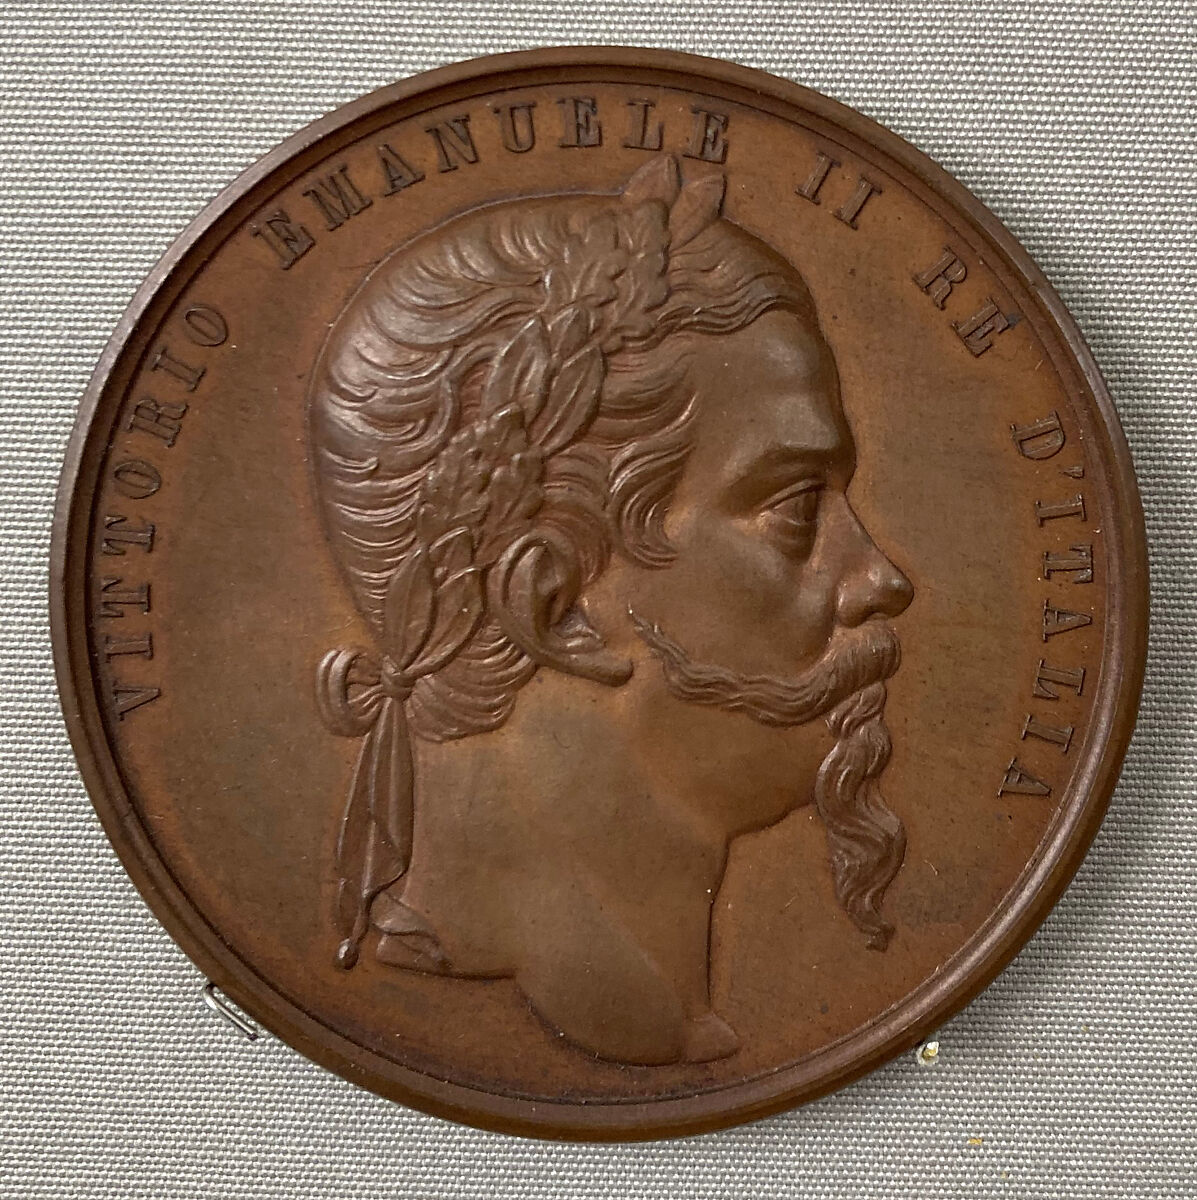 Complimentary Medal of Victor Emanuel, King of Italy, on the Completion of the Suez Canal, 1869, Medalist: E. Trotin, Bronze, French 